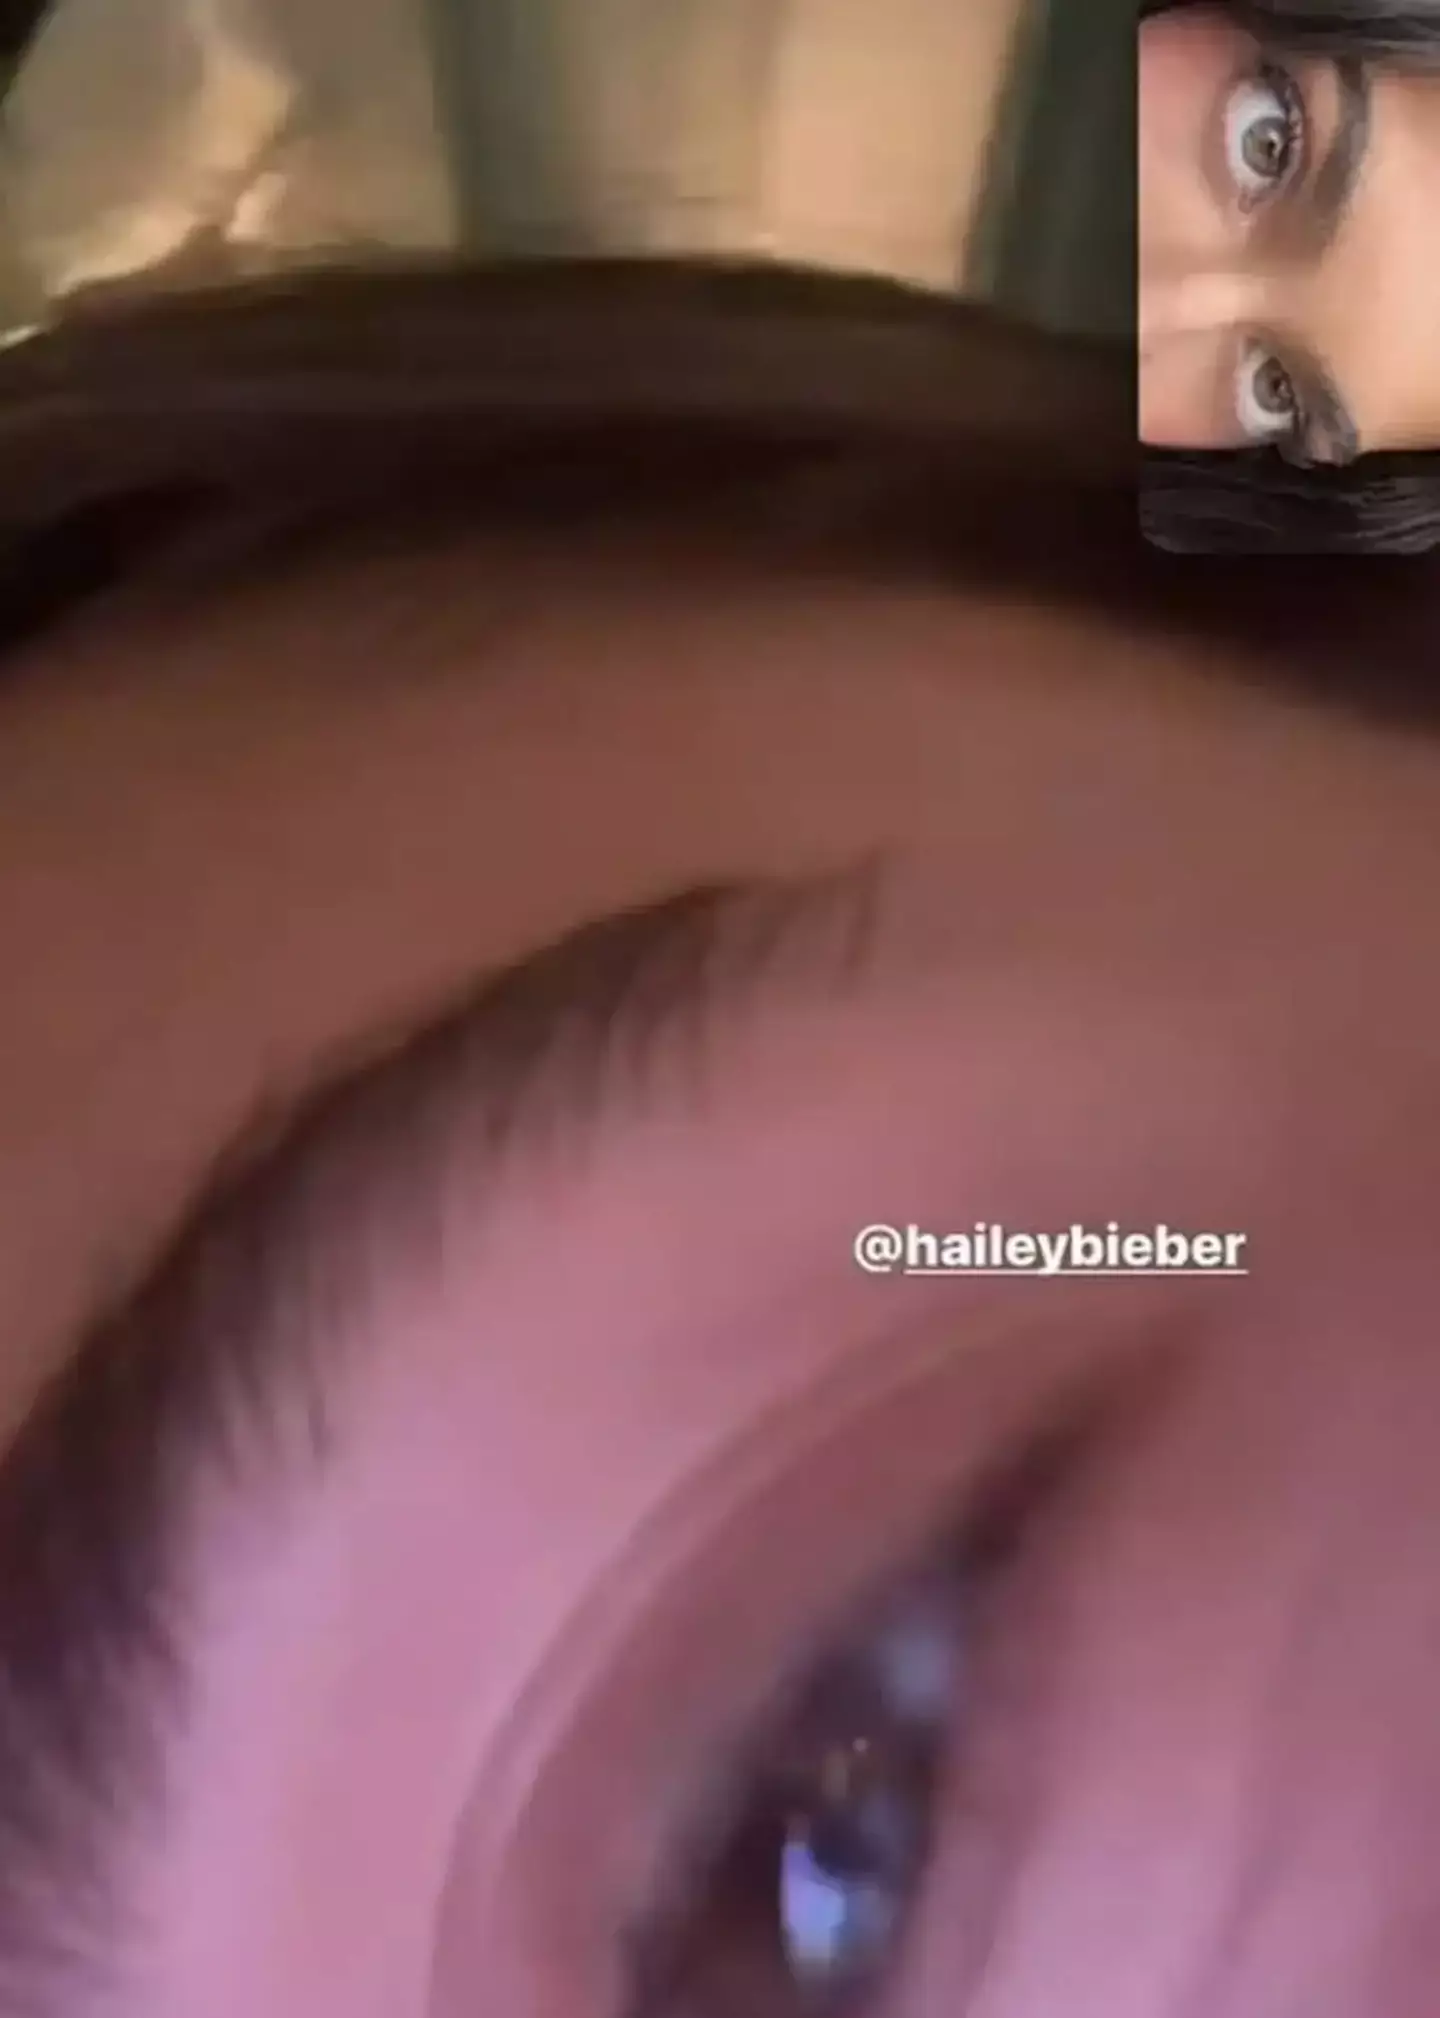 Kylie and Hailey were accused of 'mocking' Selena's eyebrow mishap.